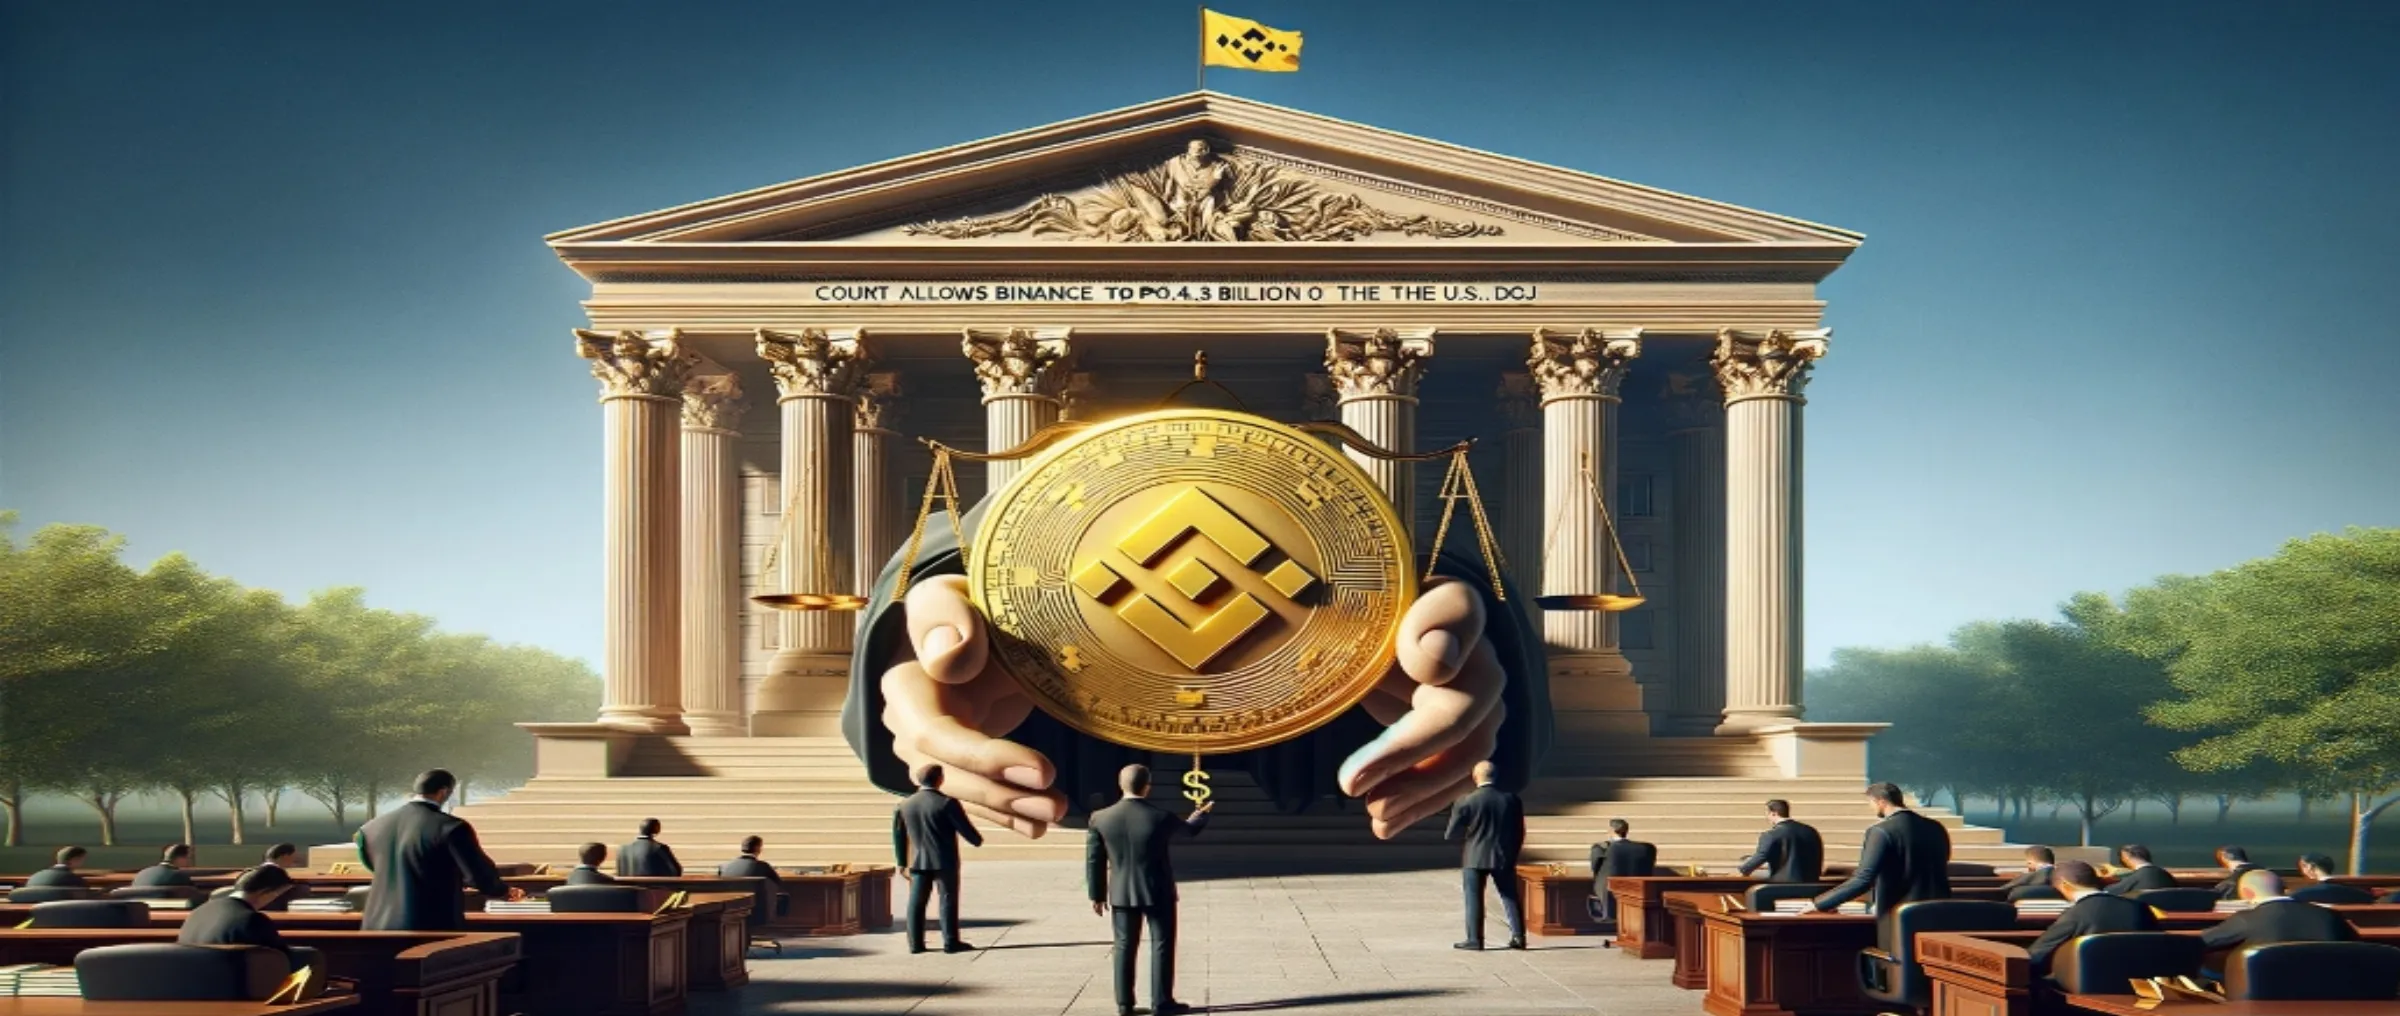 The court allowed Binance to pay $4.3 billion in favor of the US Department of Justice